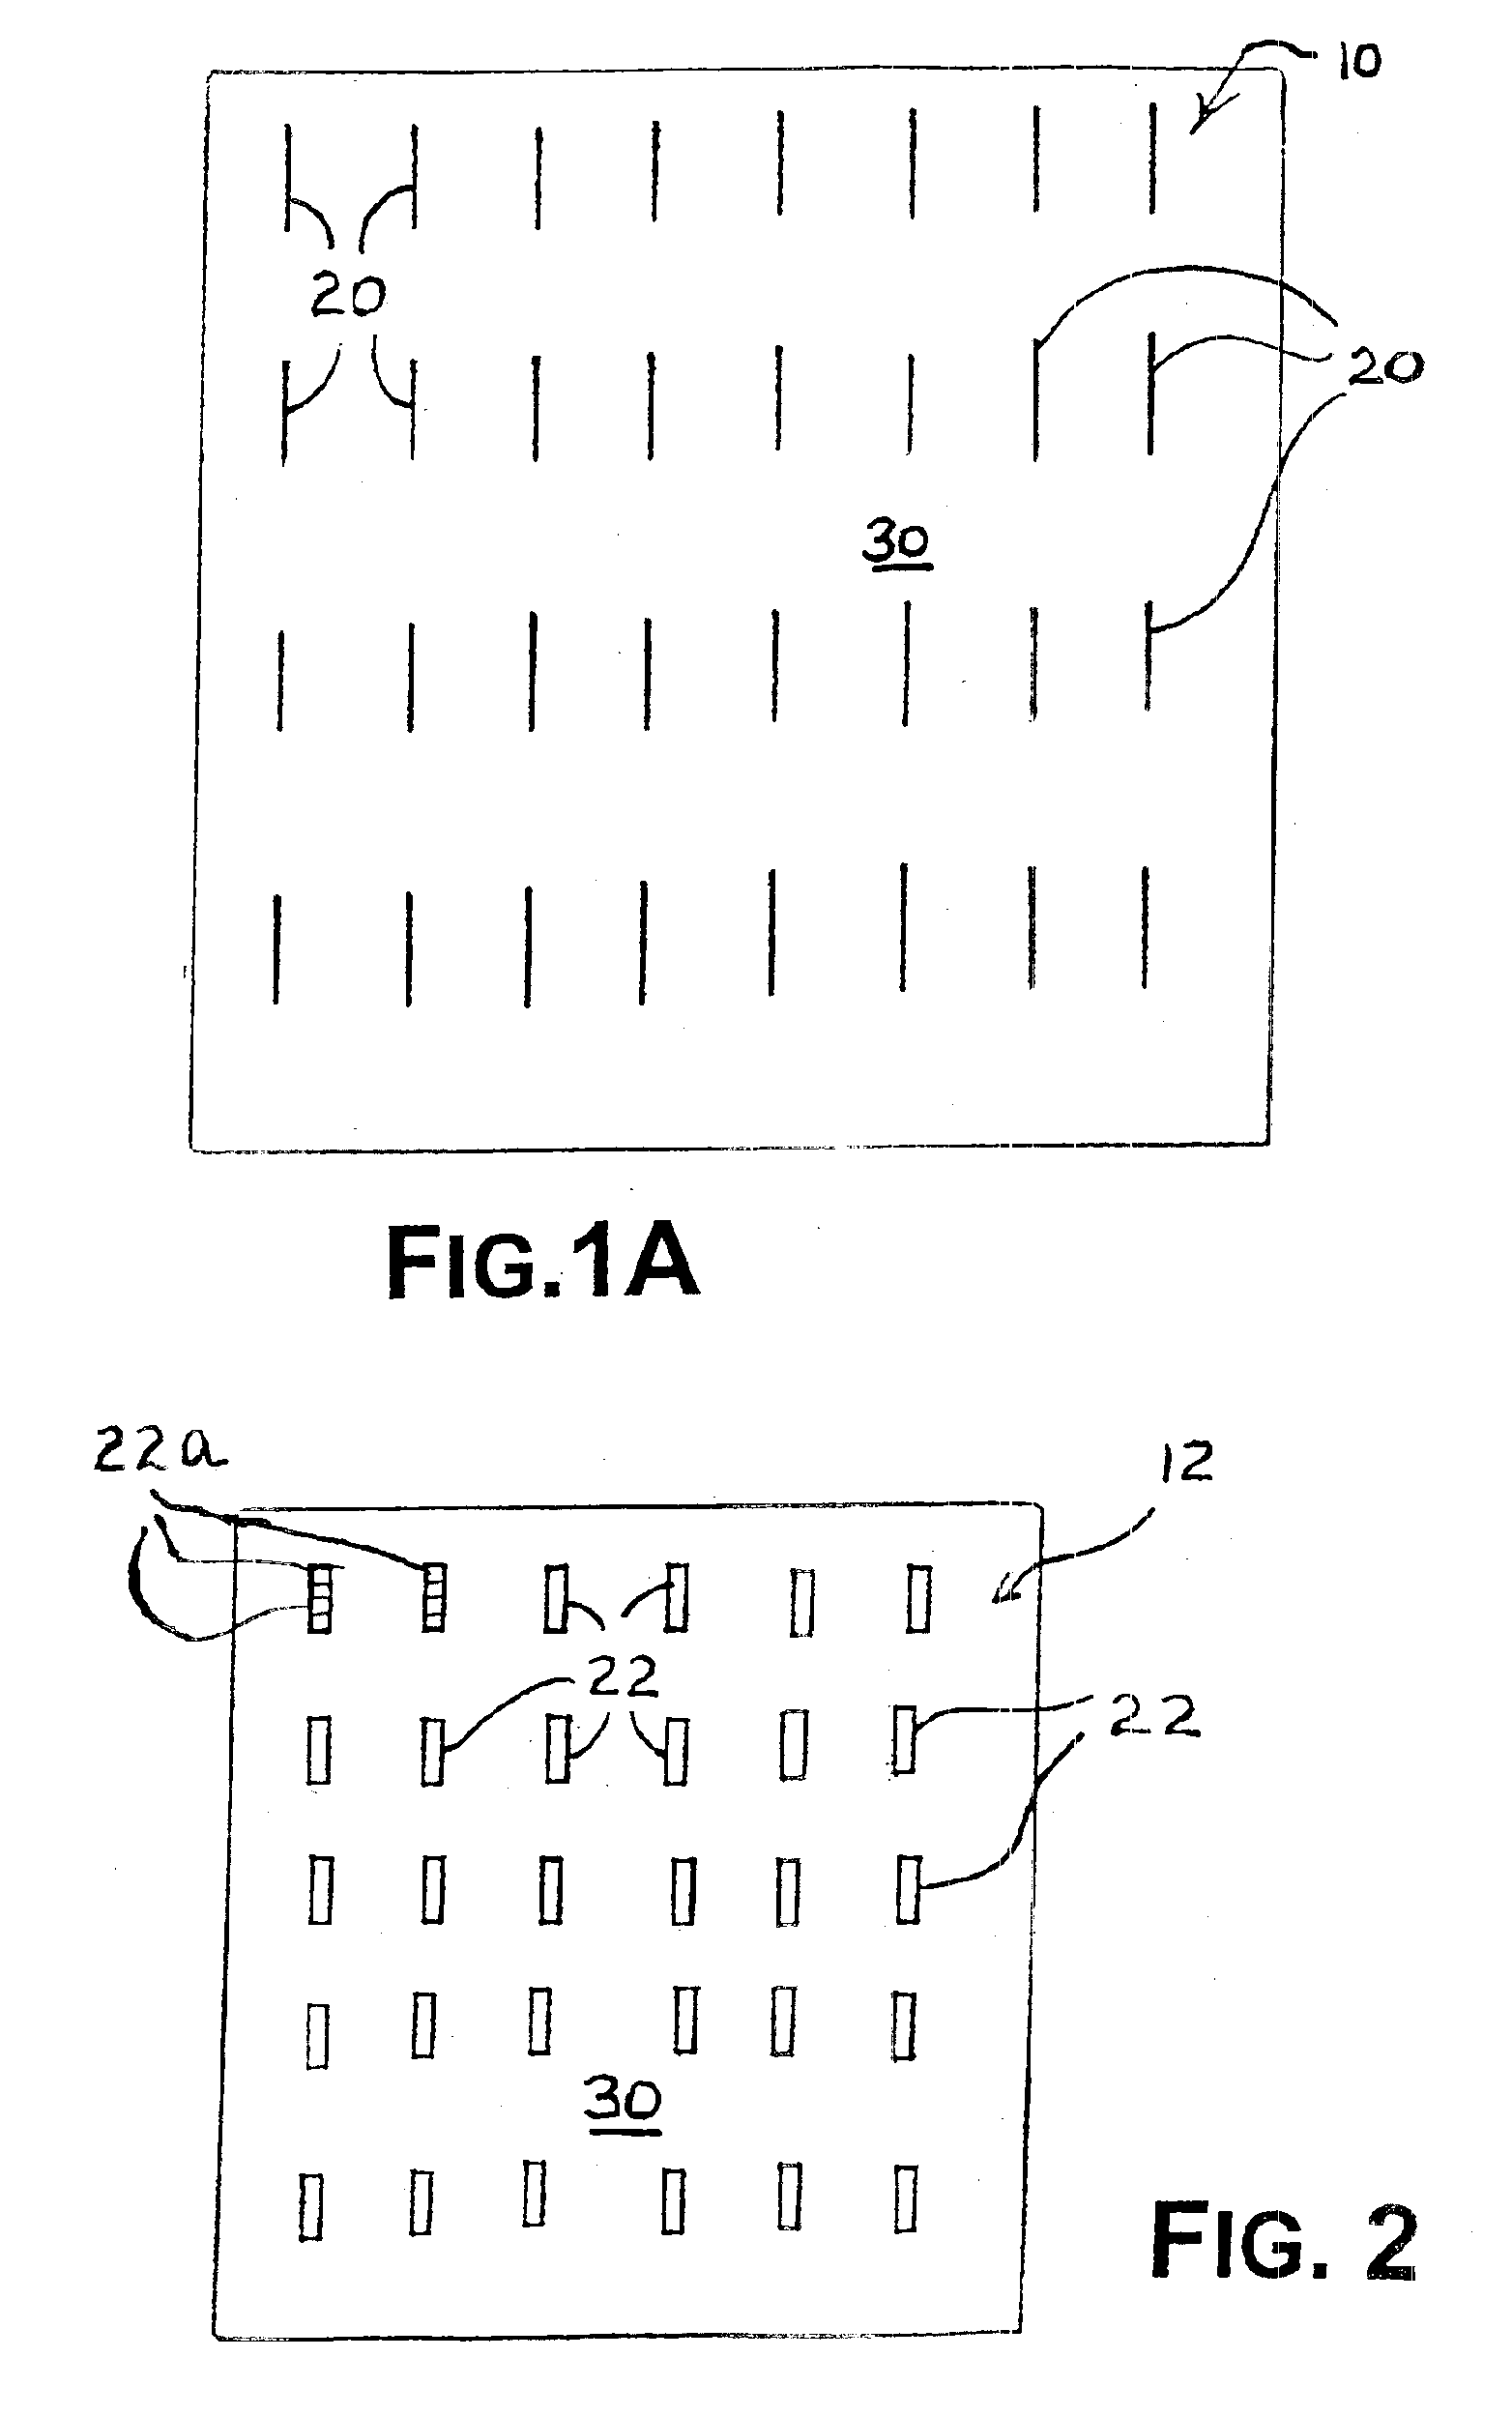 Configurable arrays for steerable antennas and wireless network incorporating the steerable antennas